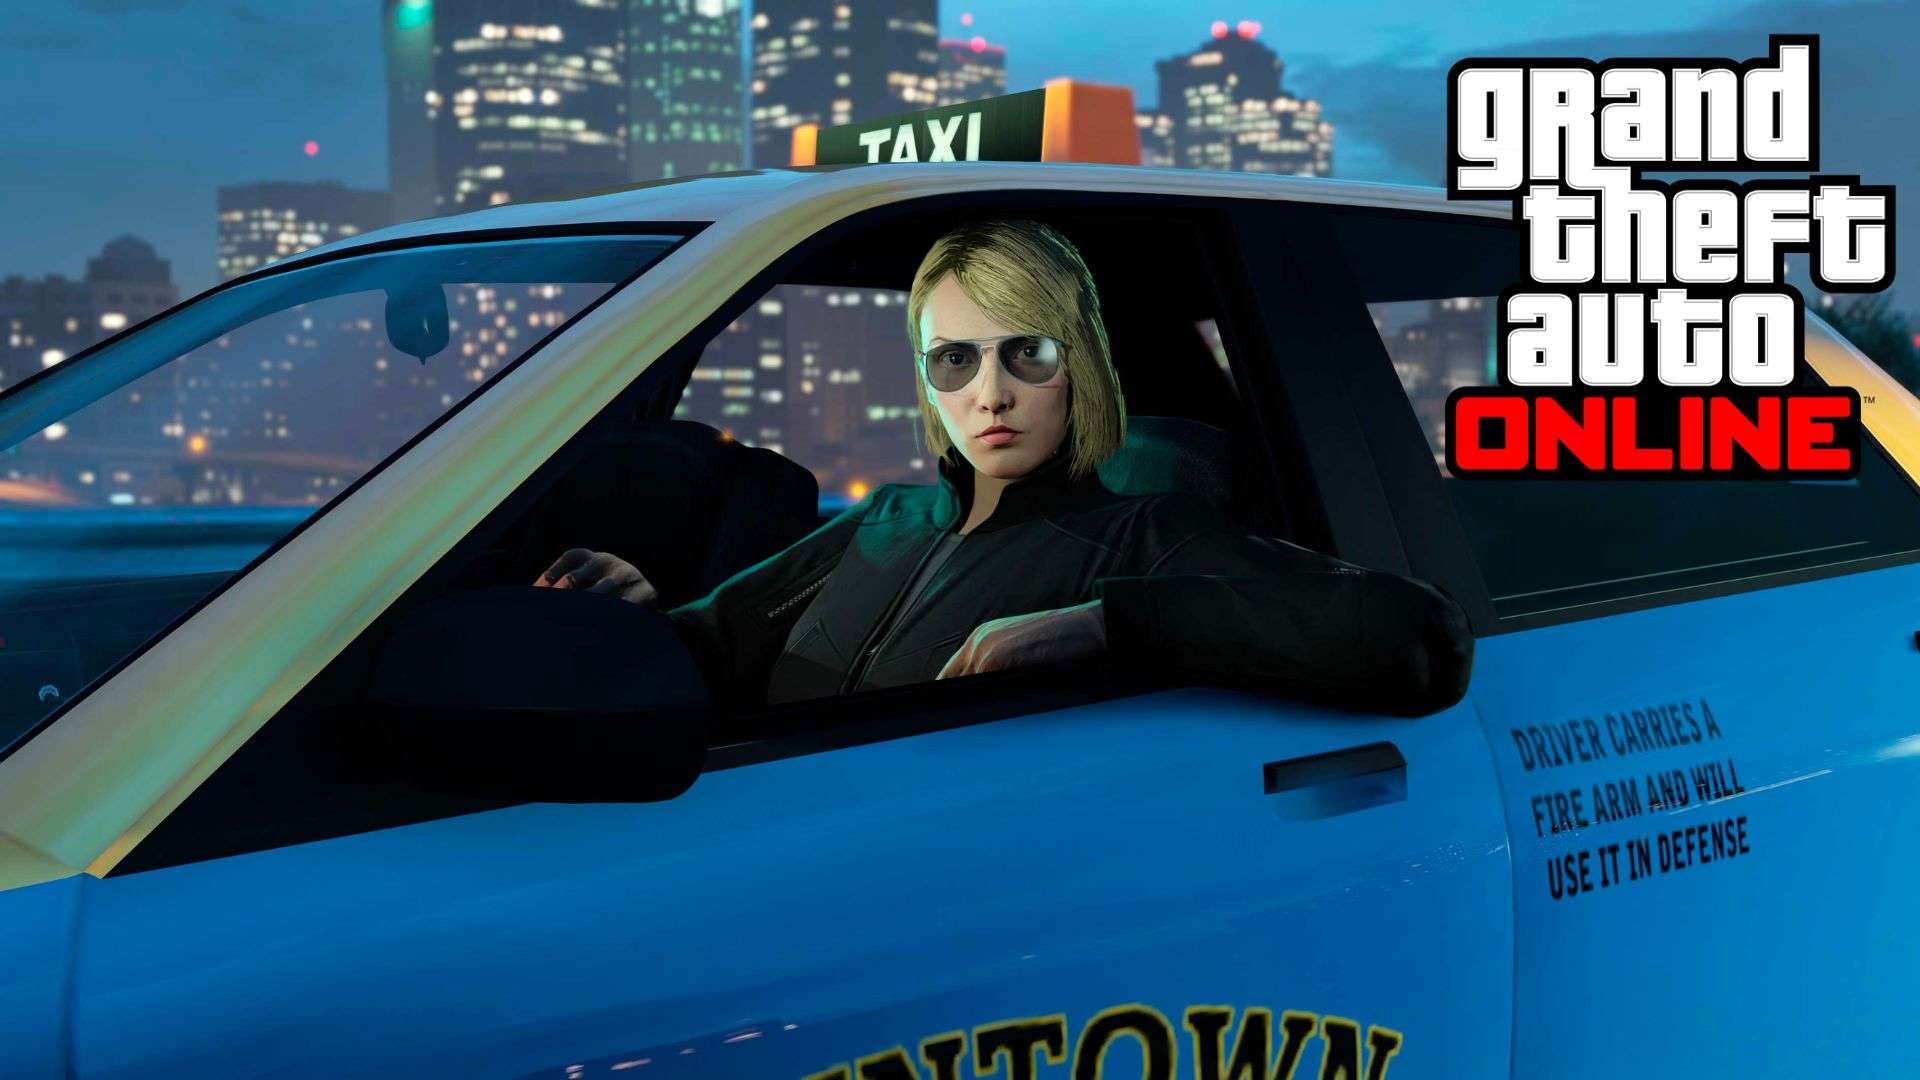 GTA online character sitting in blue taxi